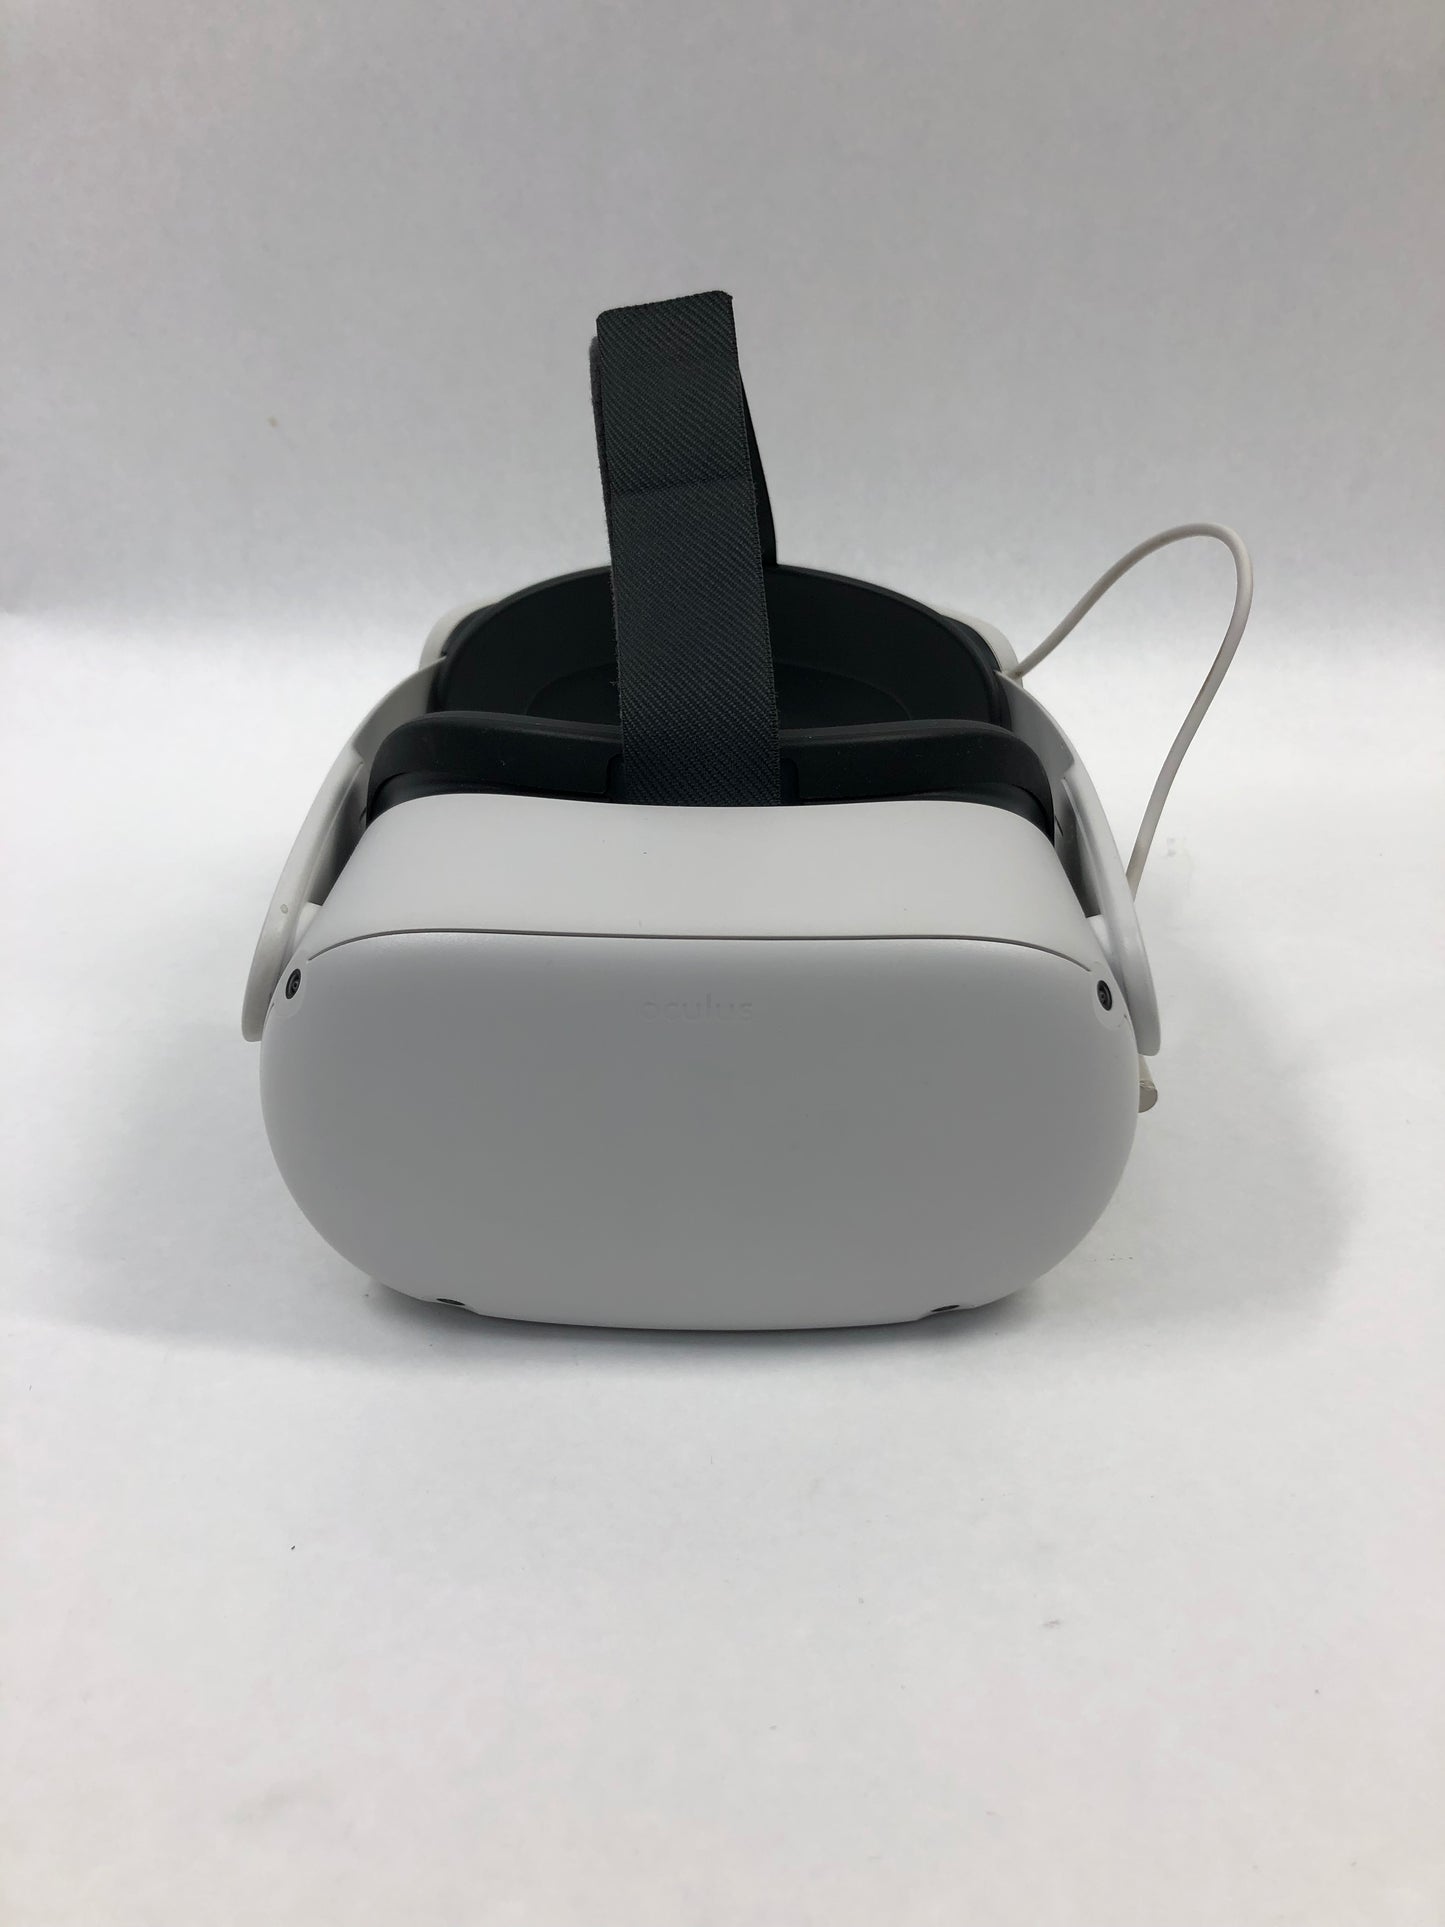 Oculus Quest 2 64GB Virtual Reality Headset KW49CM Head Set Only